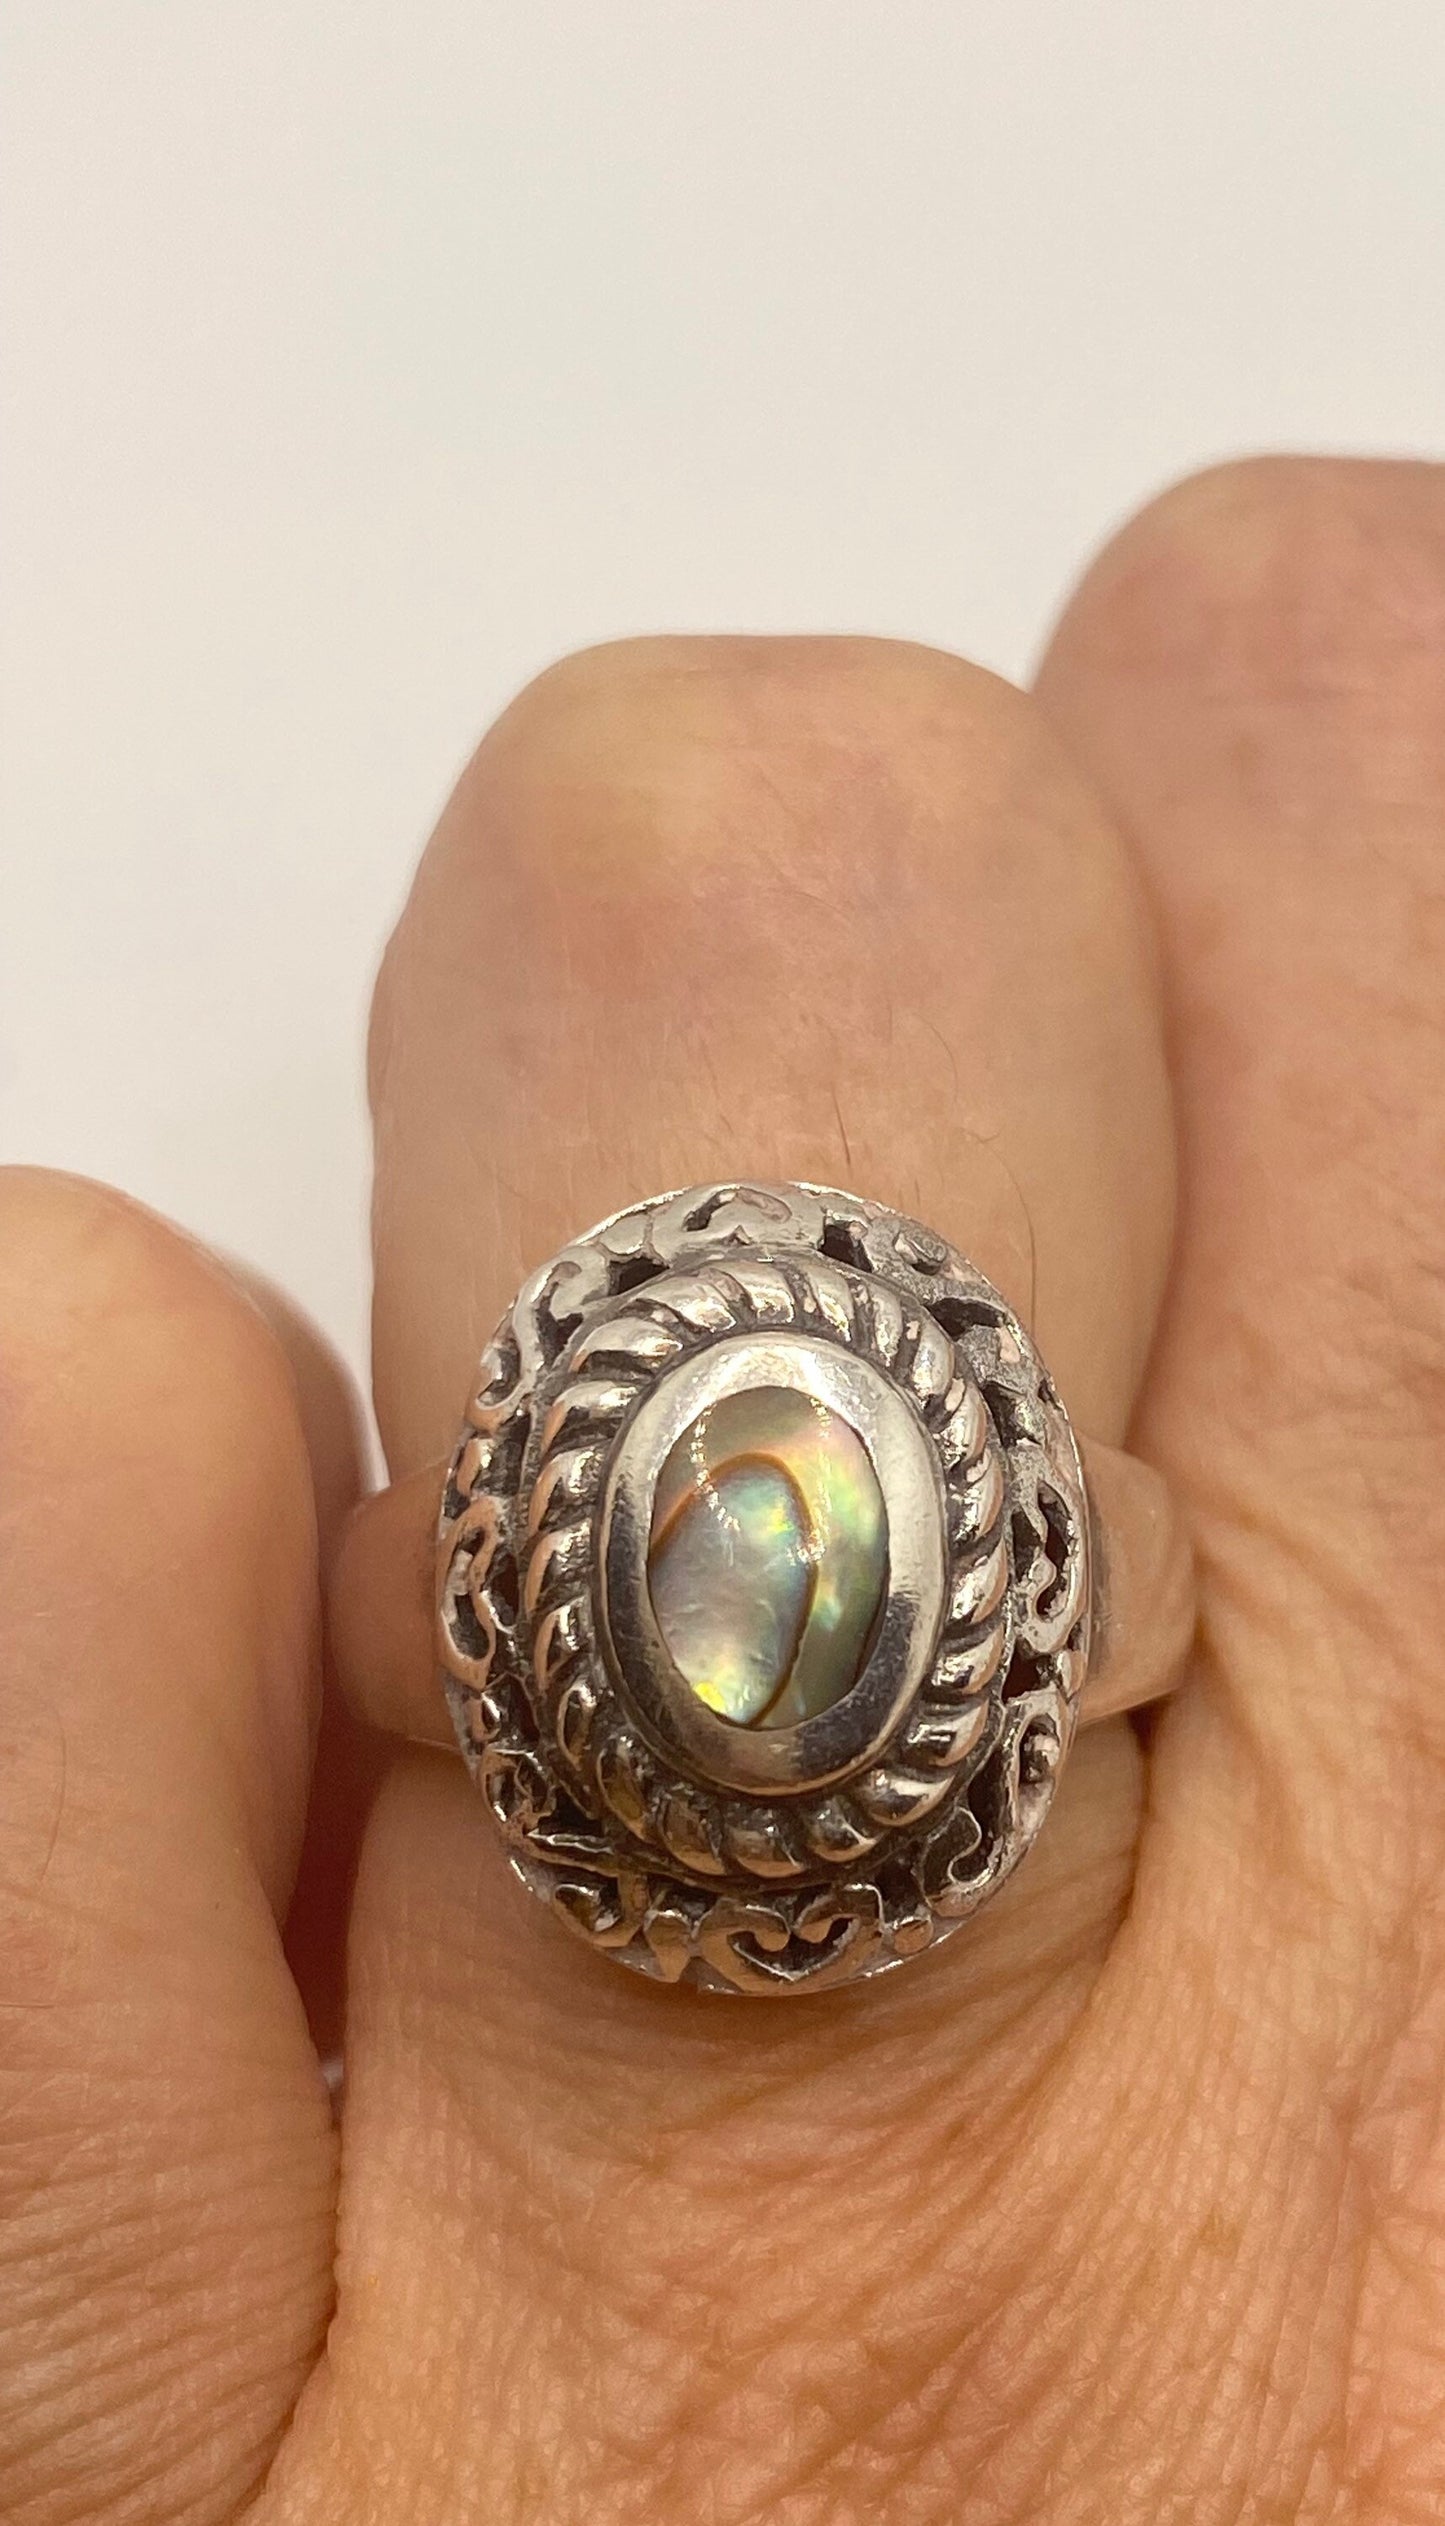 Antique Abalone Filigree 925 Sterling Silver Ring